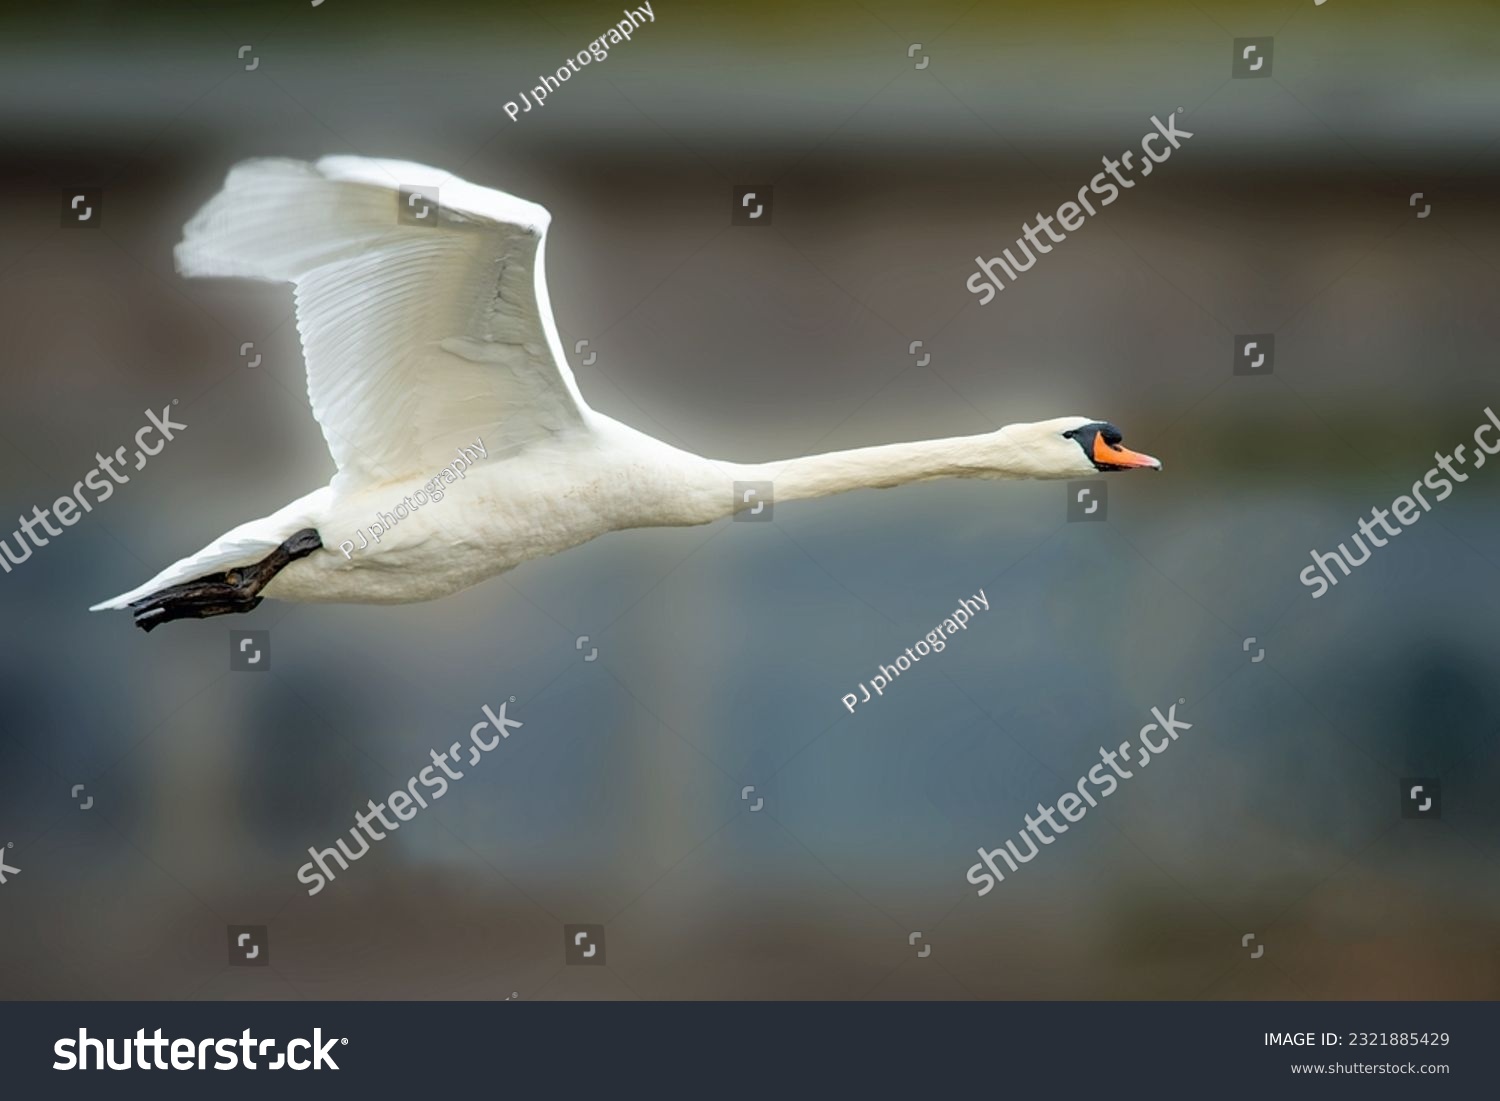 Mute swan, Cygnus olor, in flight with diffused background at Slimbridge WWT in early spring, Gloucestershire, UK #2321885429